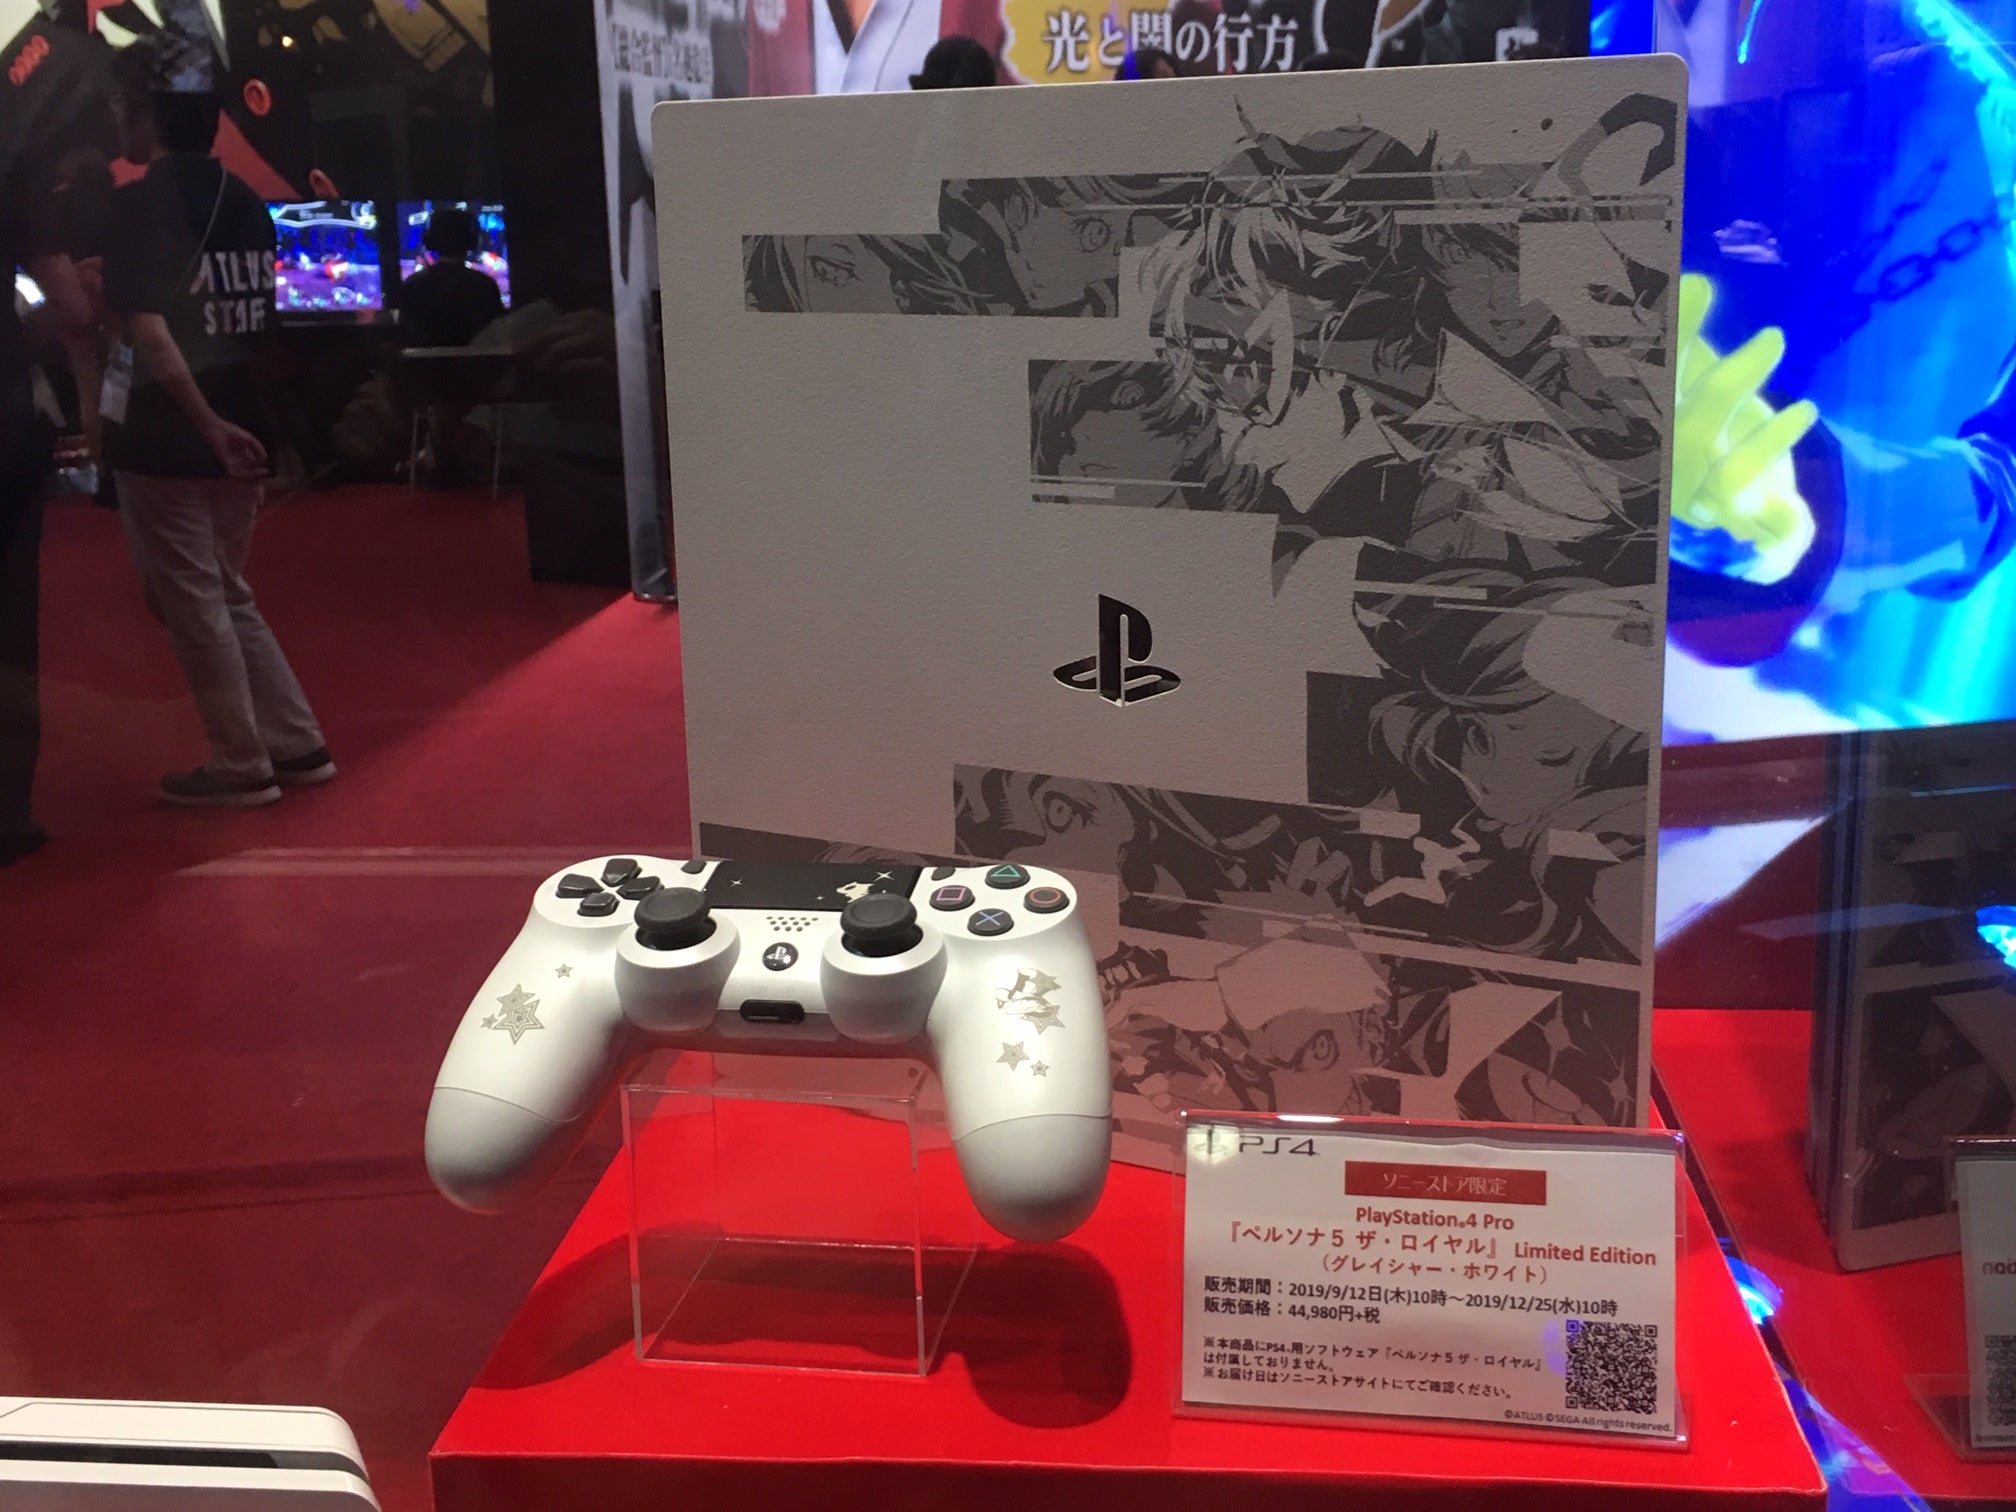 The Persona 5 PlayStation 4 Looks Beautiful